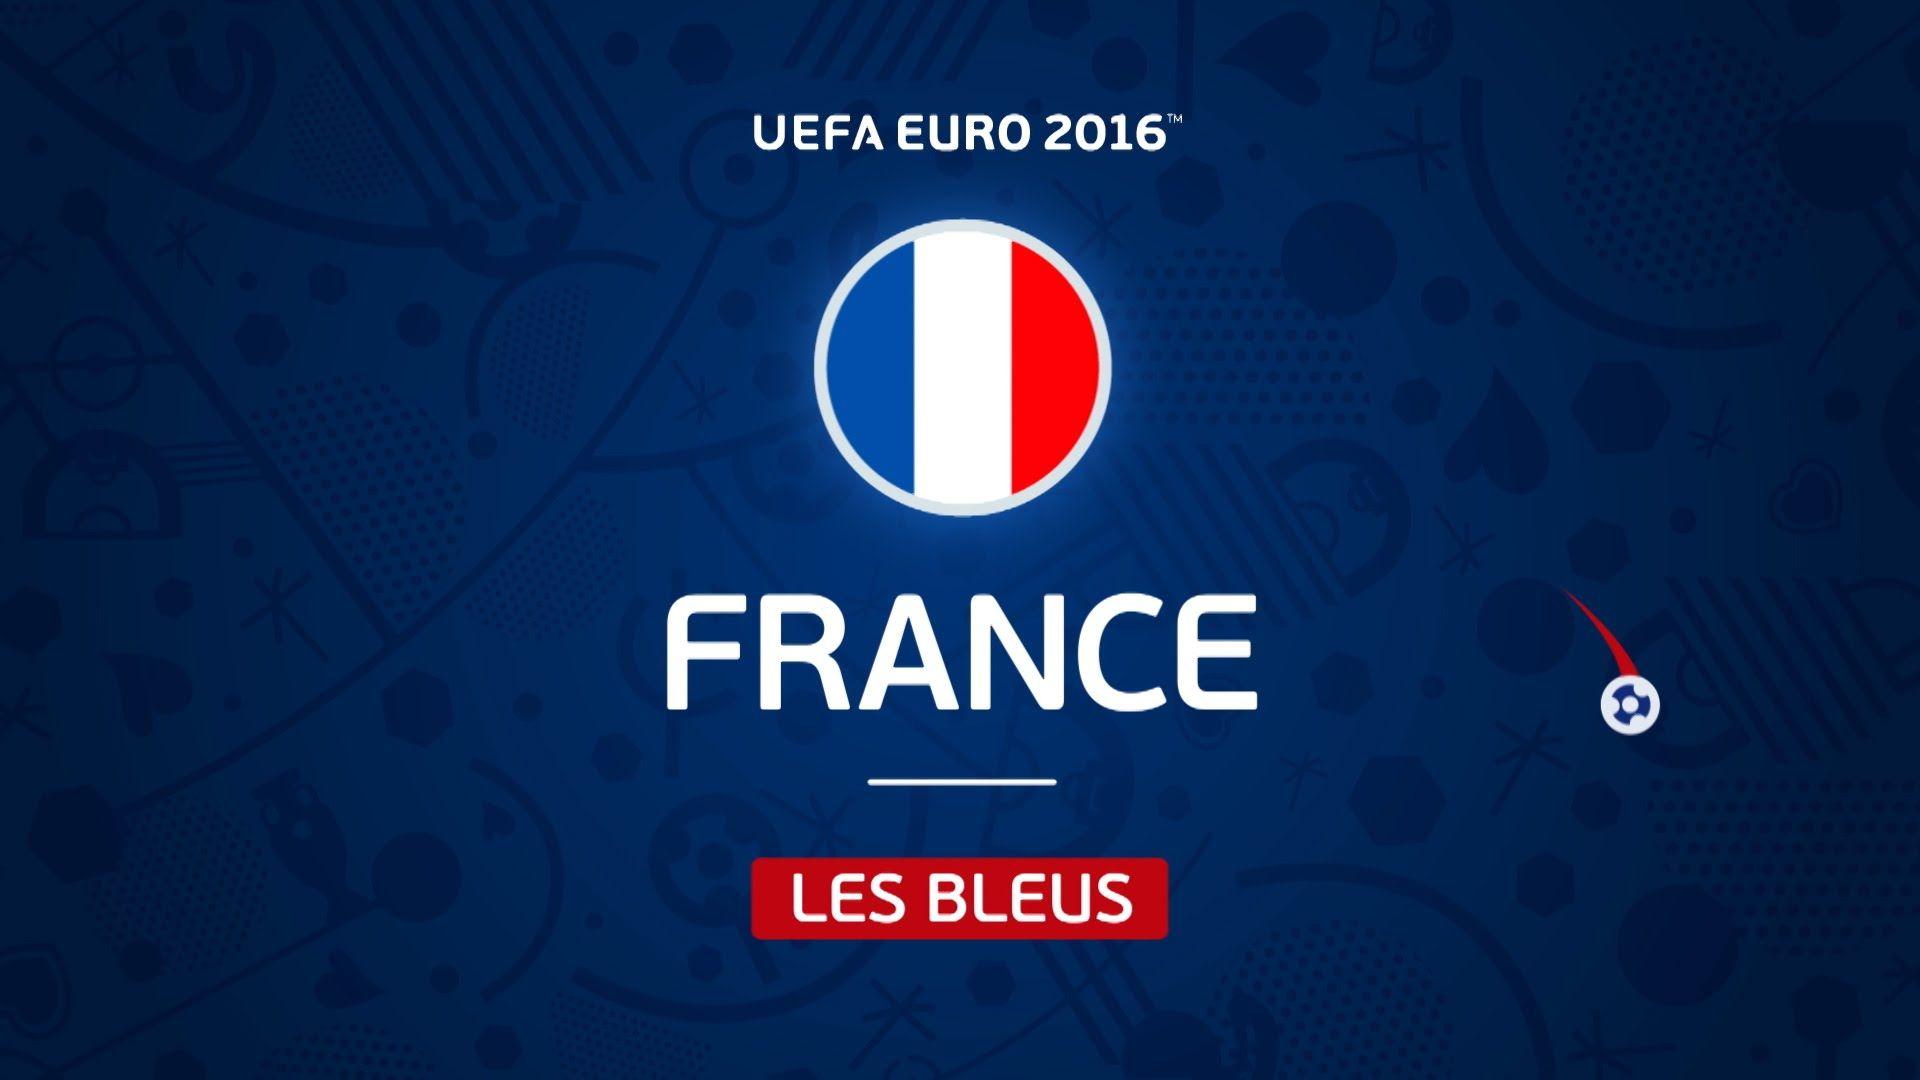 France at UEFA EURO 2016 in 30 seconds